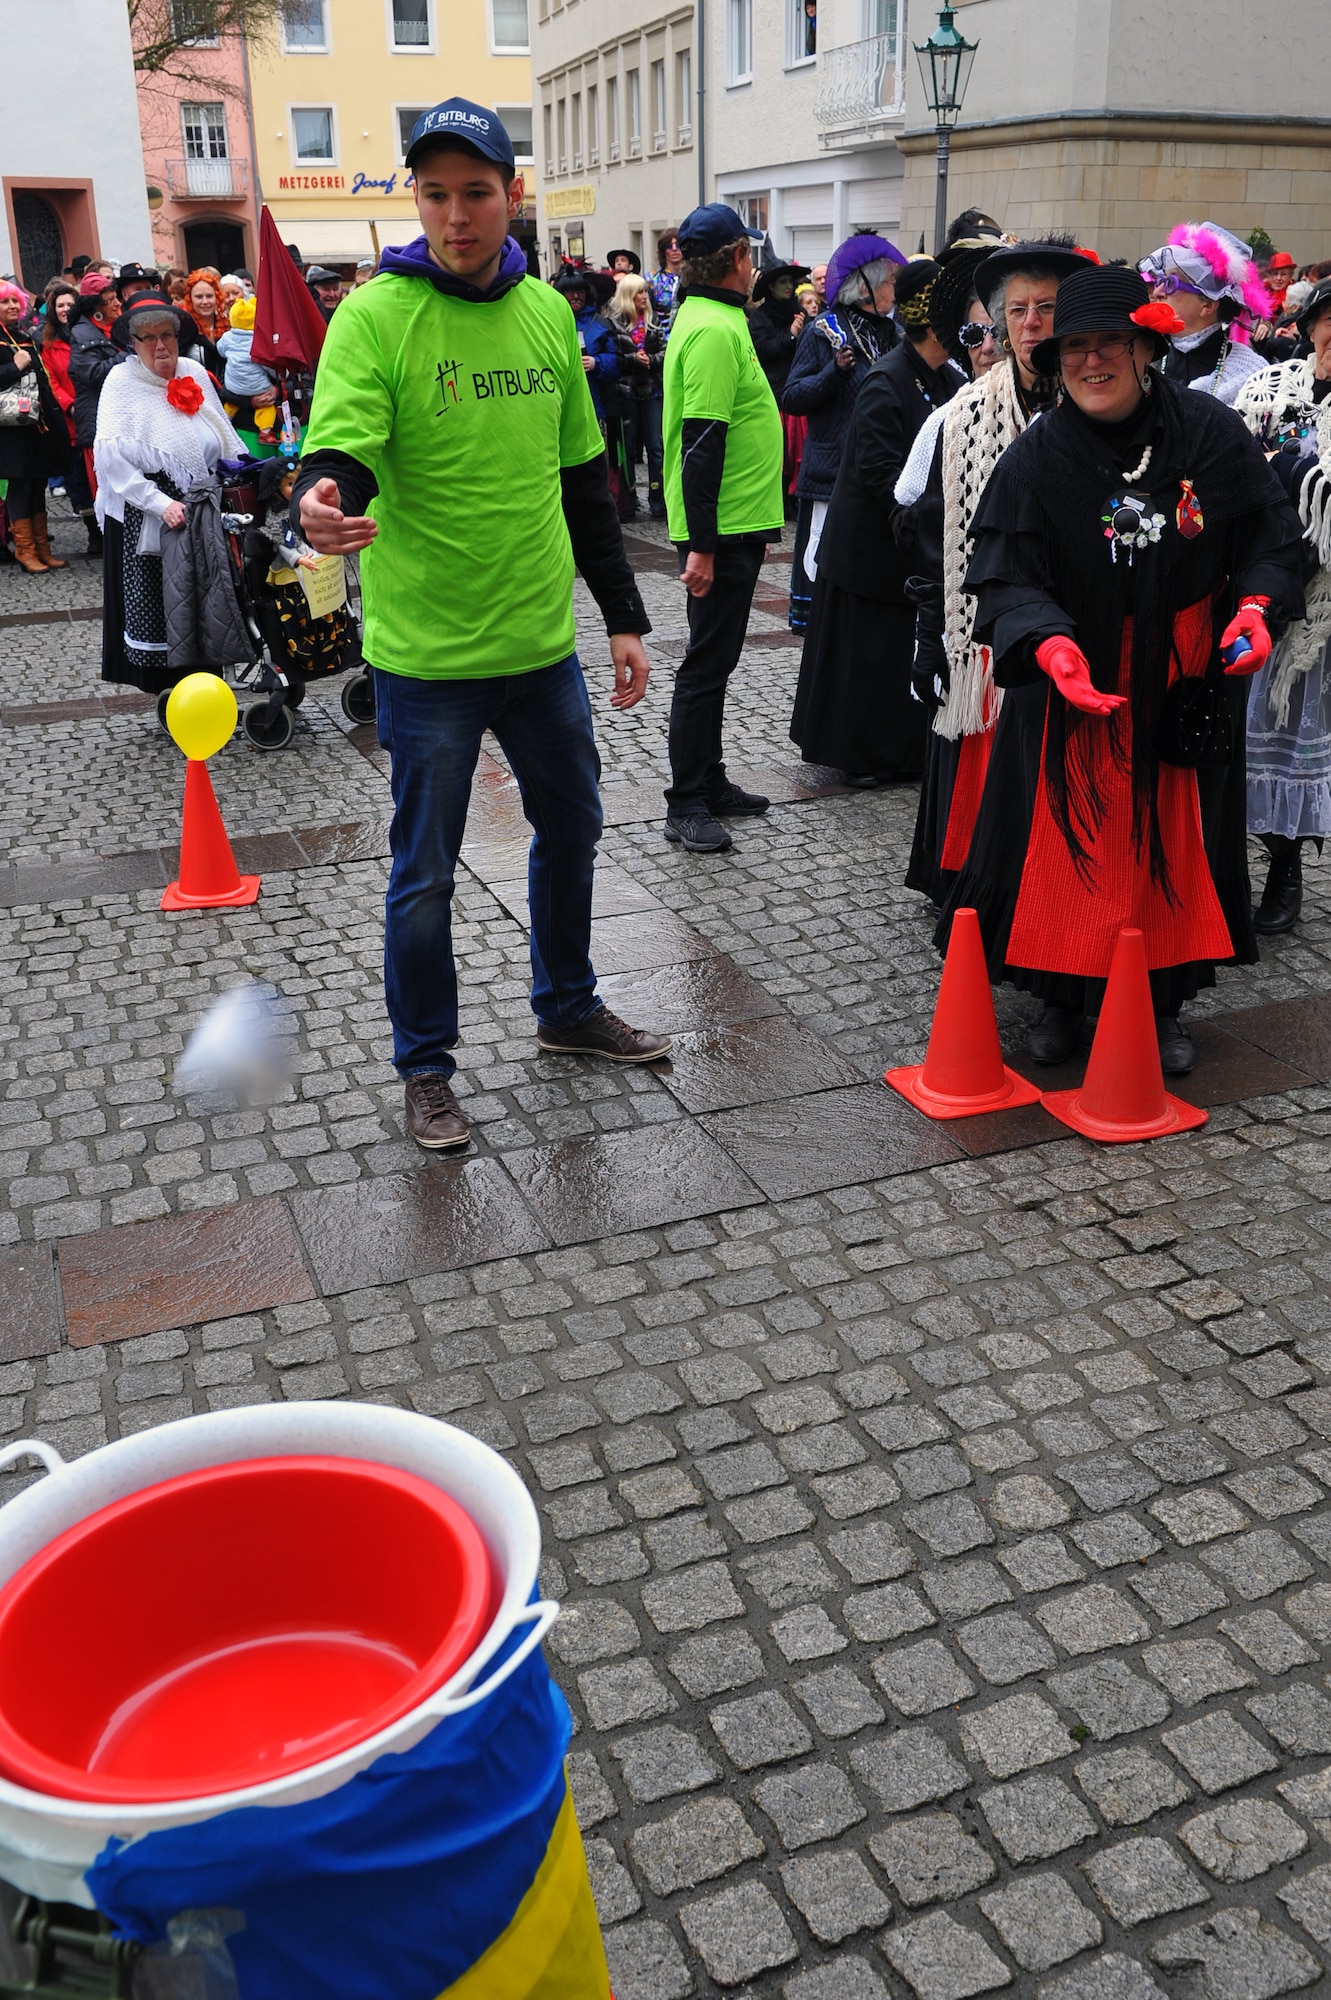 BITBURG, Germany – A Fasching participant tosses a beanbag into a bucket as part of an obstacle course during Ladies Fasching Day celebrations at the Bitburg Town Hall here Feb. 16. Ladies Fasching Day is a German celebration where women “take over” the city for the day. Once the ladies have “taken over” the city hall, the celebrations begin with dancing and parading throughout the city. The traditional Fasching celebrations begin the Thursday prior to Lent at the 11th minute past the 11th hour, continue until Ash Wednesday and allow people to indulge before the Lent season. (U.S. Air Force photo by Airman 1st Class Dillon Davis/Released)